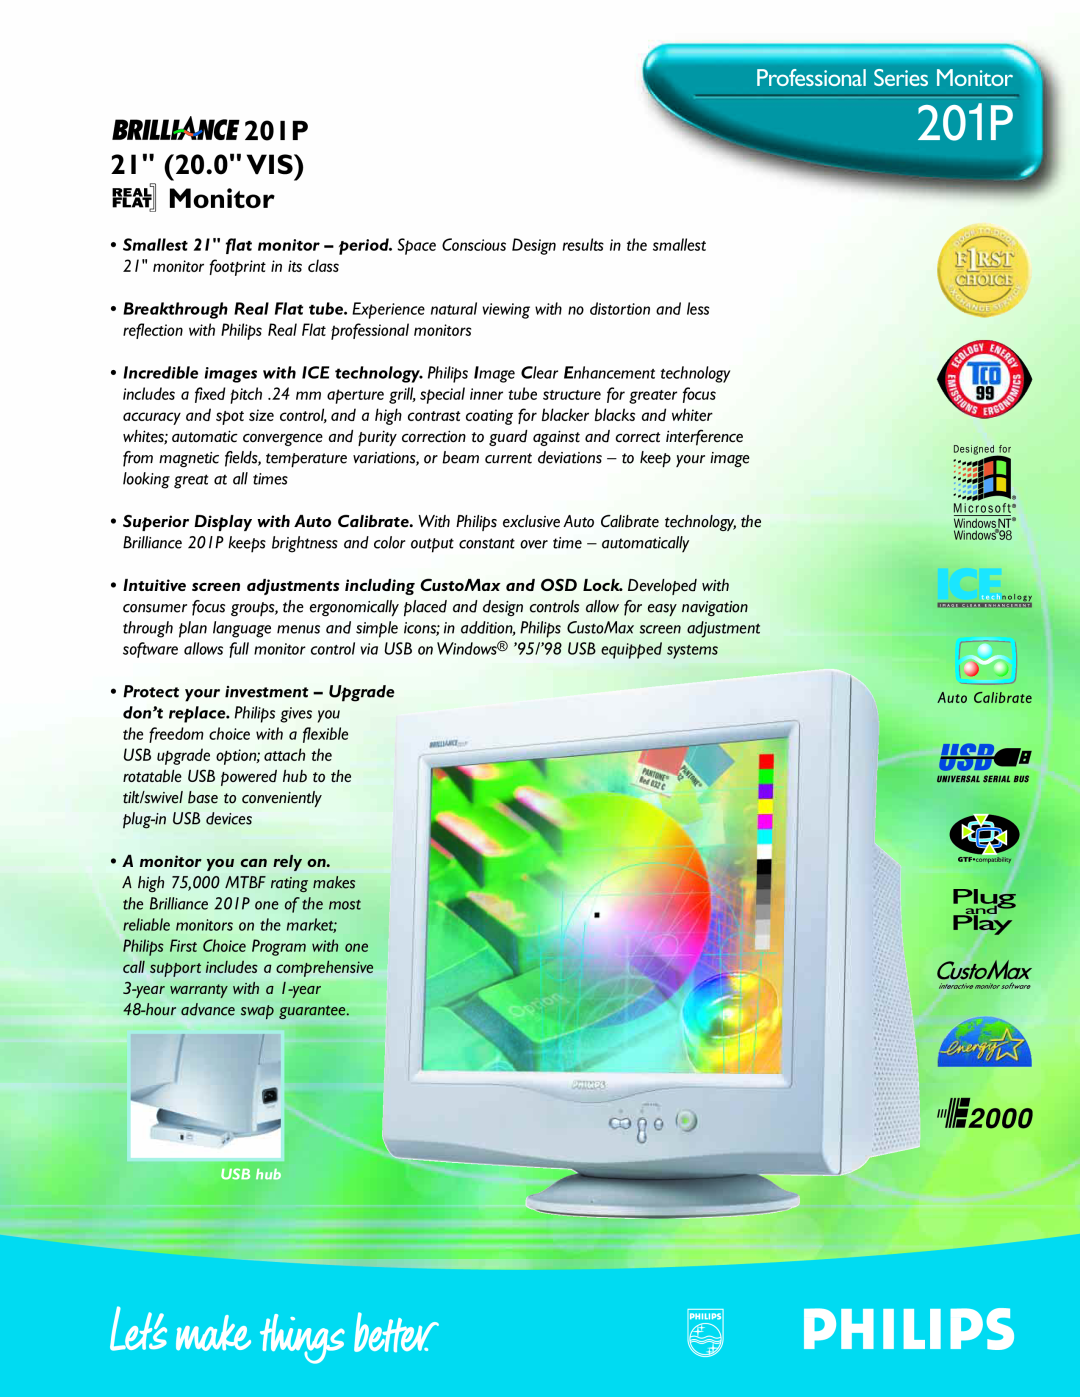 Philips 201P201P warranty 21 20.0 VIS Monitor, Professional Series Monitor, A monitor you can rely on 